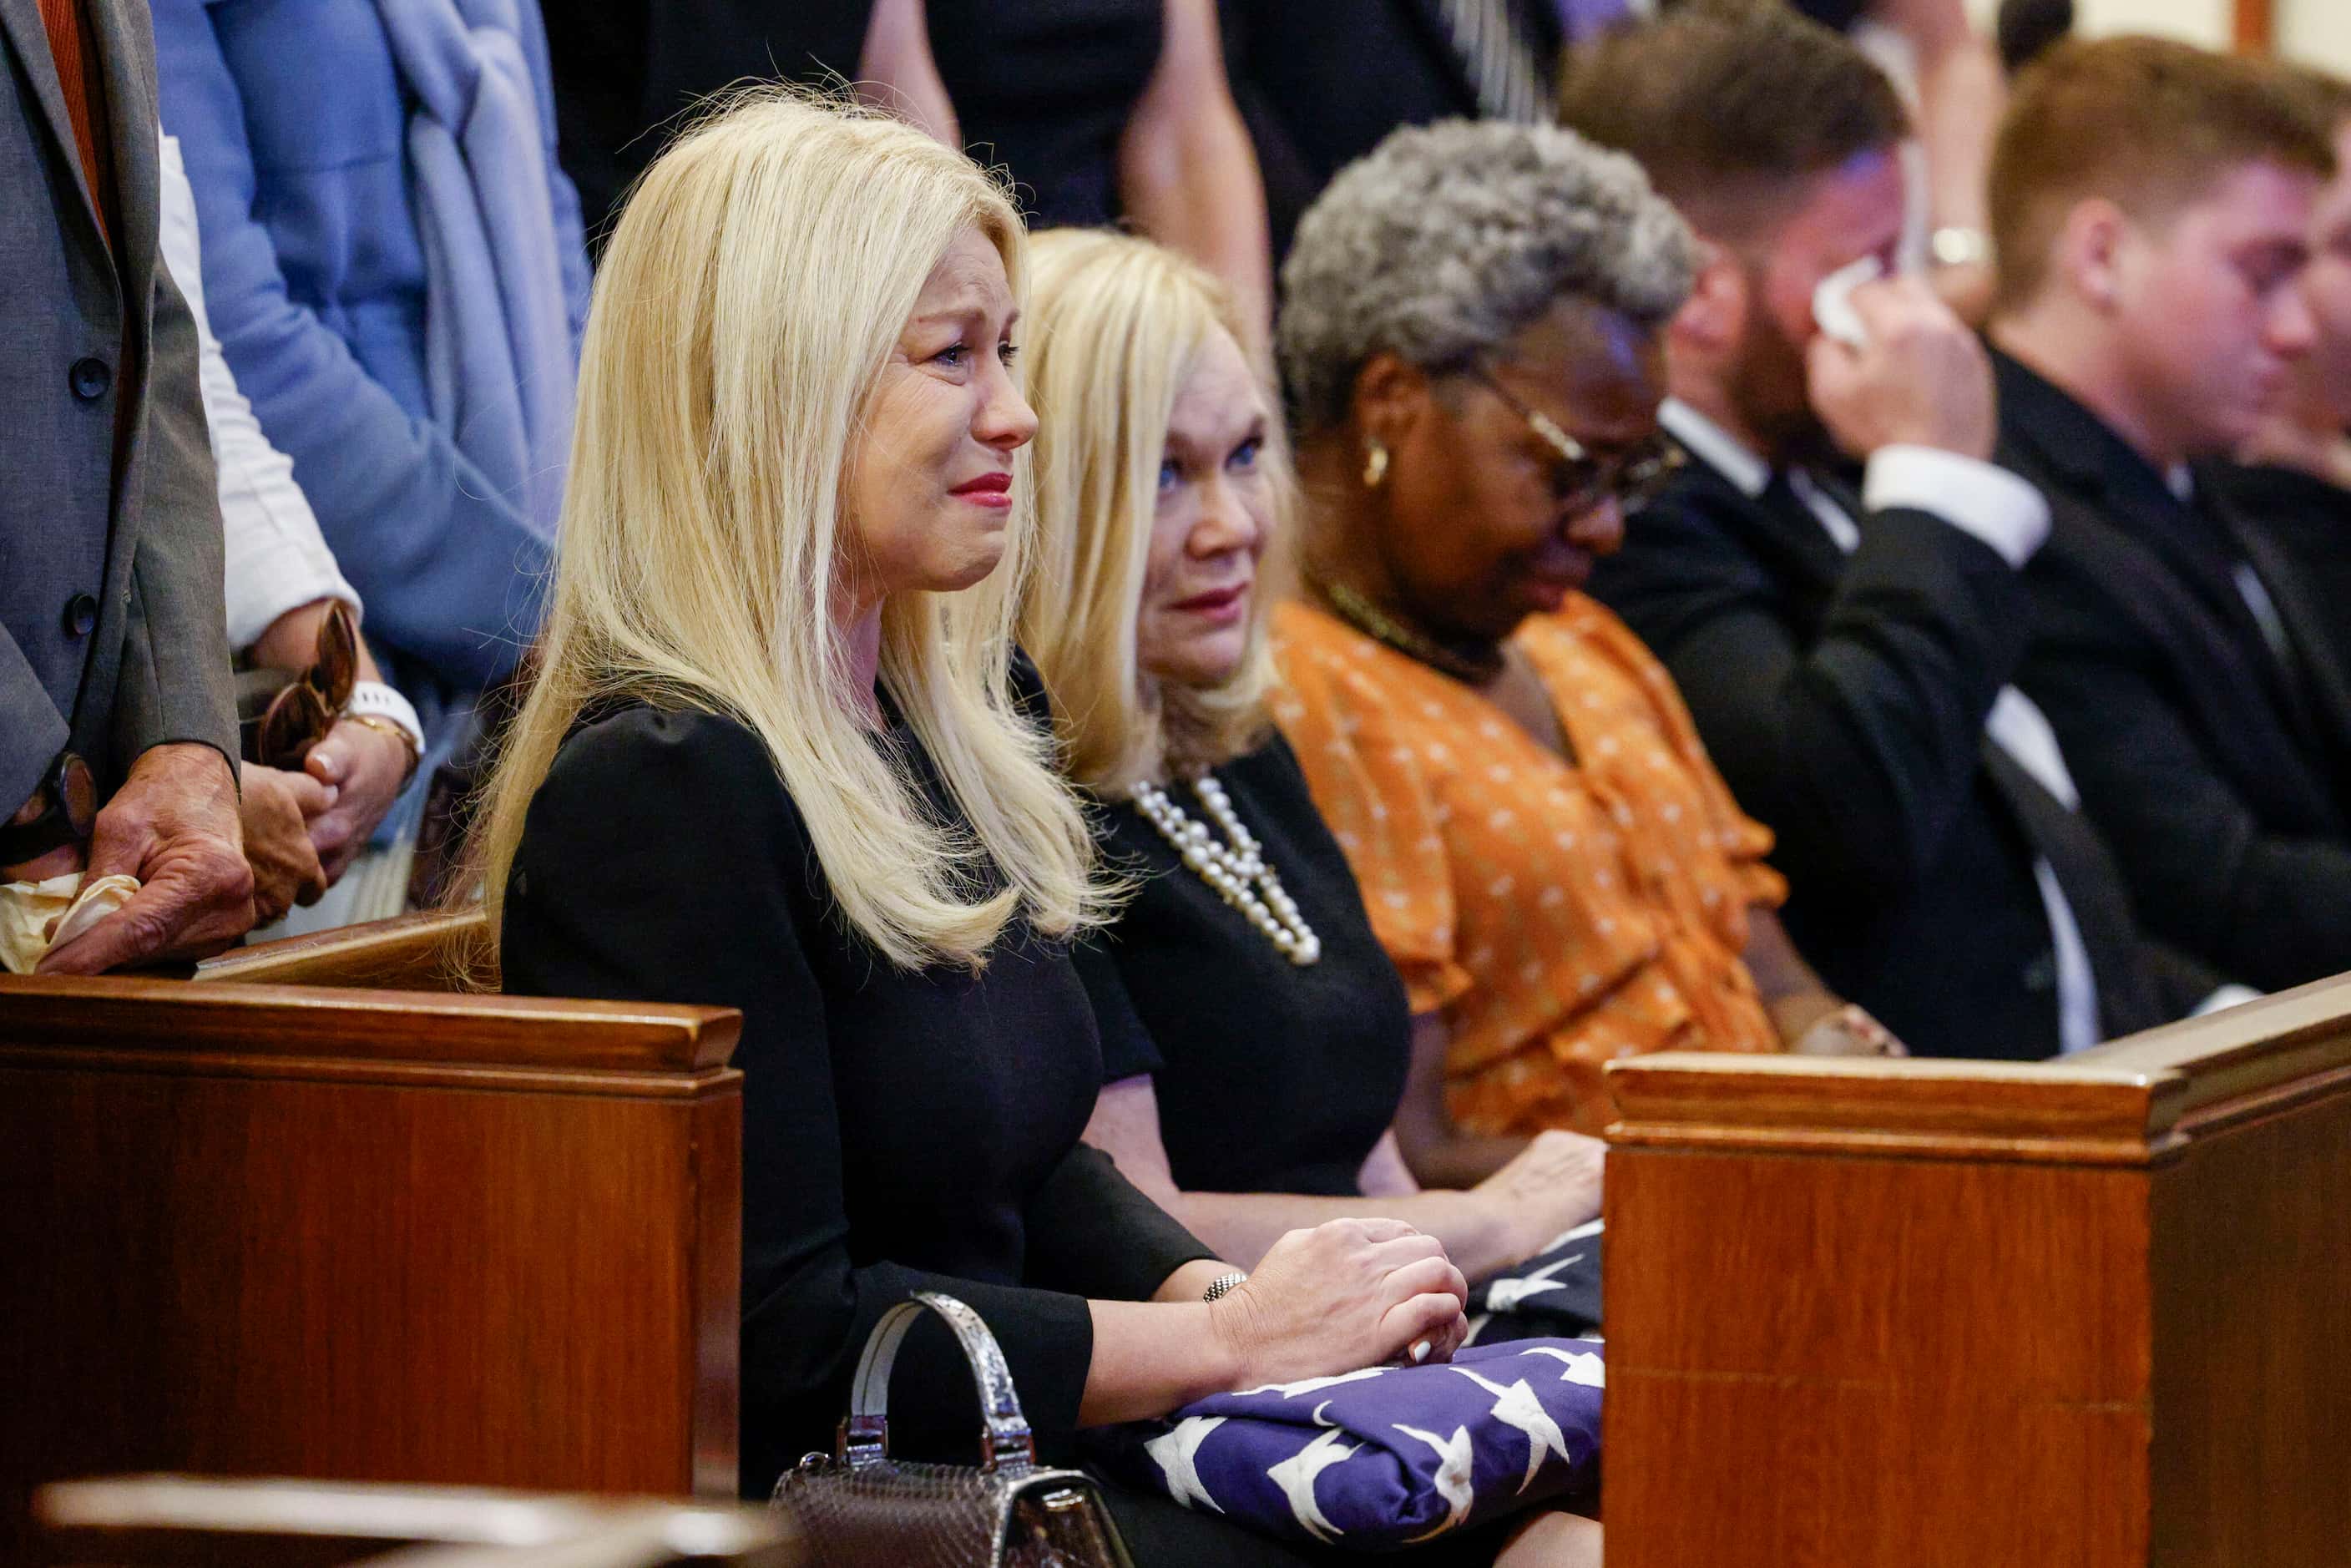 David Kunkle’s wife Sarah Dodd is overcome with emotion alongside her mother Vicki Dodd as...